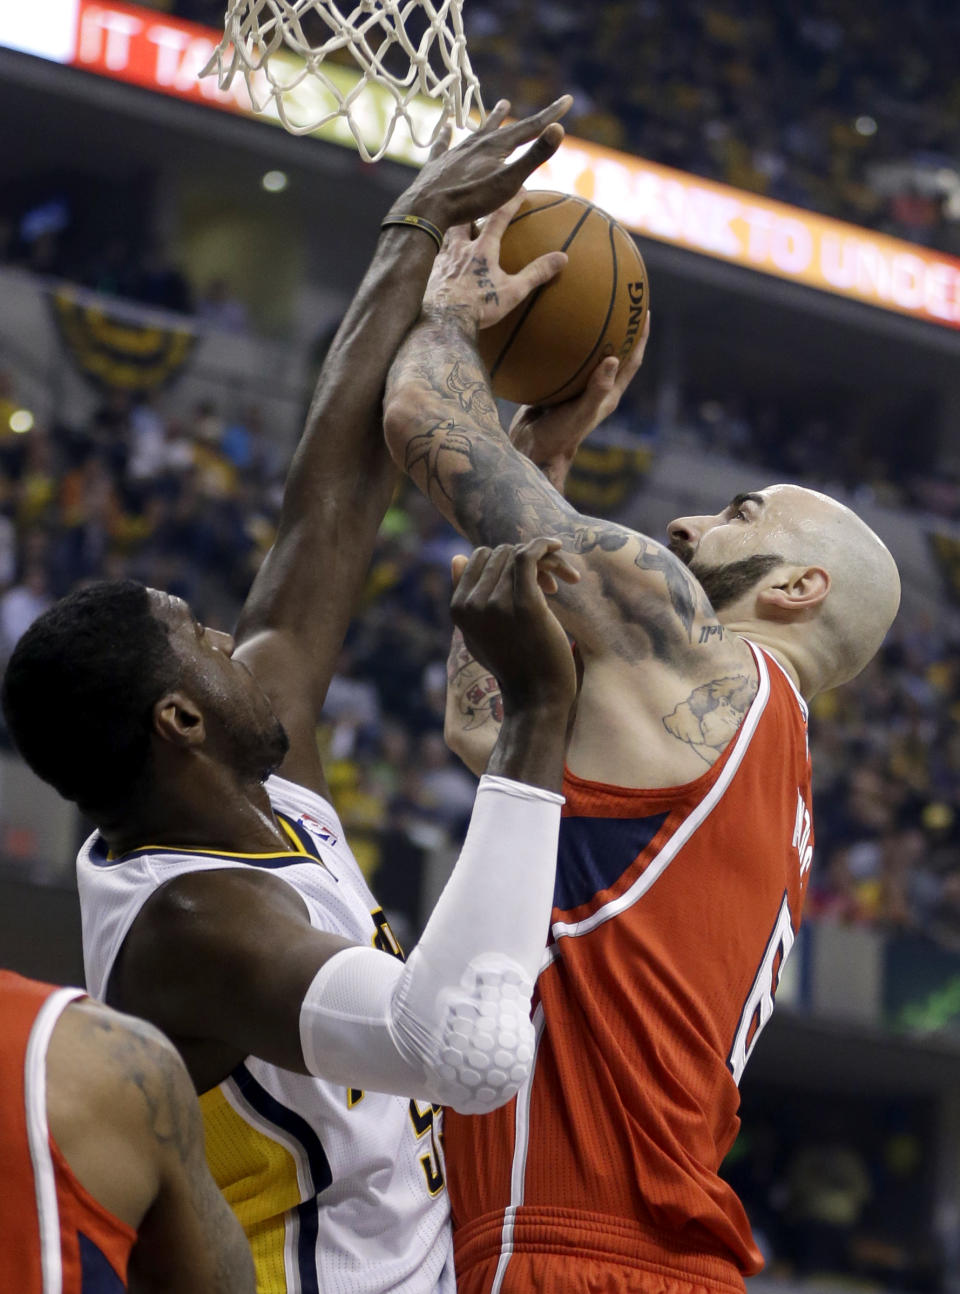 Atlanta Hawks' Pero Antic (6) has his shot blocked by Indiana Pacers' Roy Hibbert, left, during the first half in Game 5 of an opening-round NBA basketball playoff series Monday, April 28, 2014, in Indianapolis. (AP Photo/Darron Cummings)